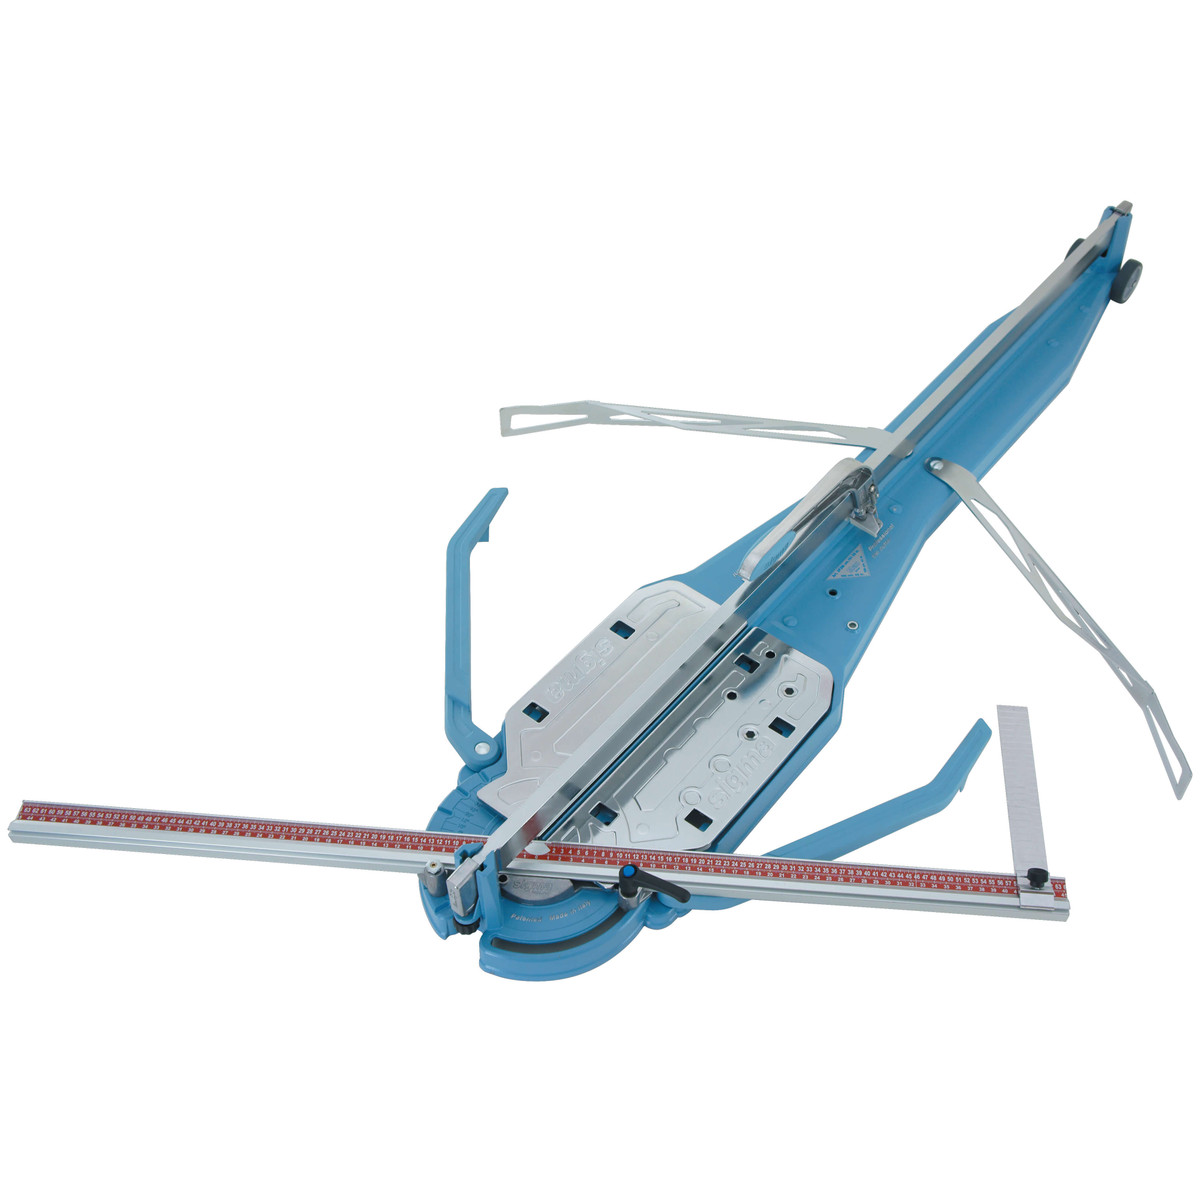 Sigma 3F4M MAX 60" Tile Cutter - Tile This